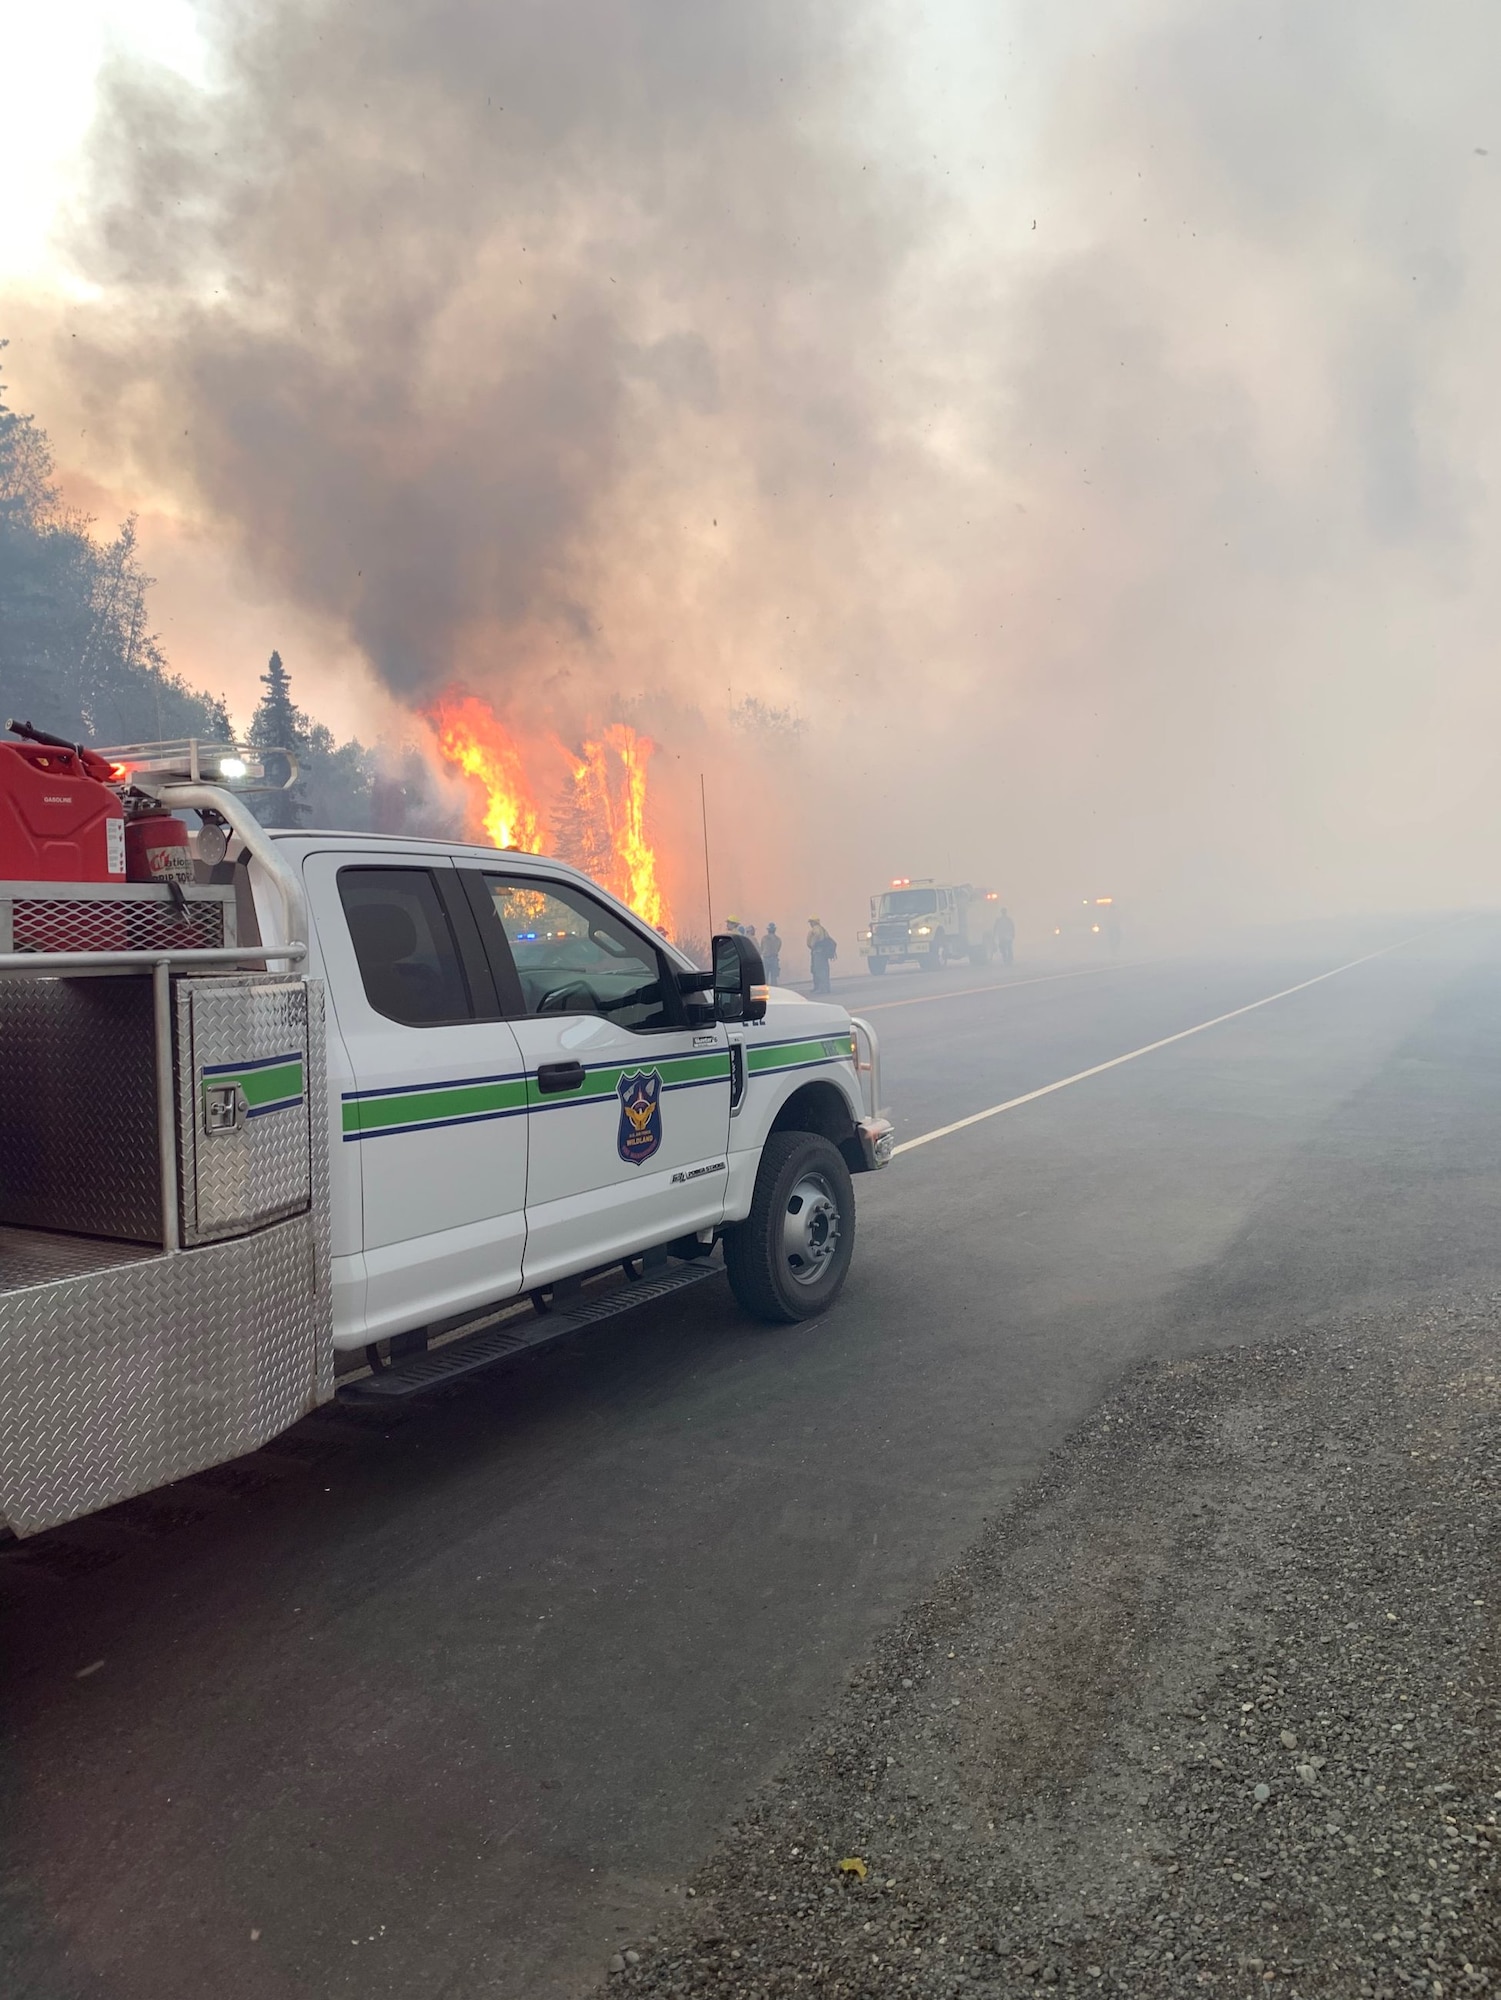 Joint Base Elmendorf-Richardson firefighters engage in fire suppression efforts on the McKinley Fire near mile marker 90.5 along the Parks Highway in Alaska, Aug. 18, 2019. The Matanuska-Susitna area fire management officer requested assistance from the JBER taskforce, which immediately responded and fought the fire alongside local and state firefighters.